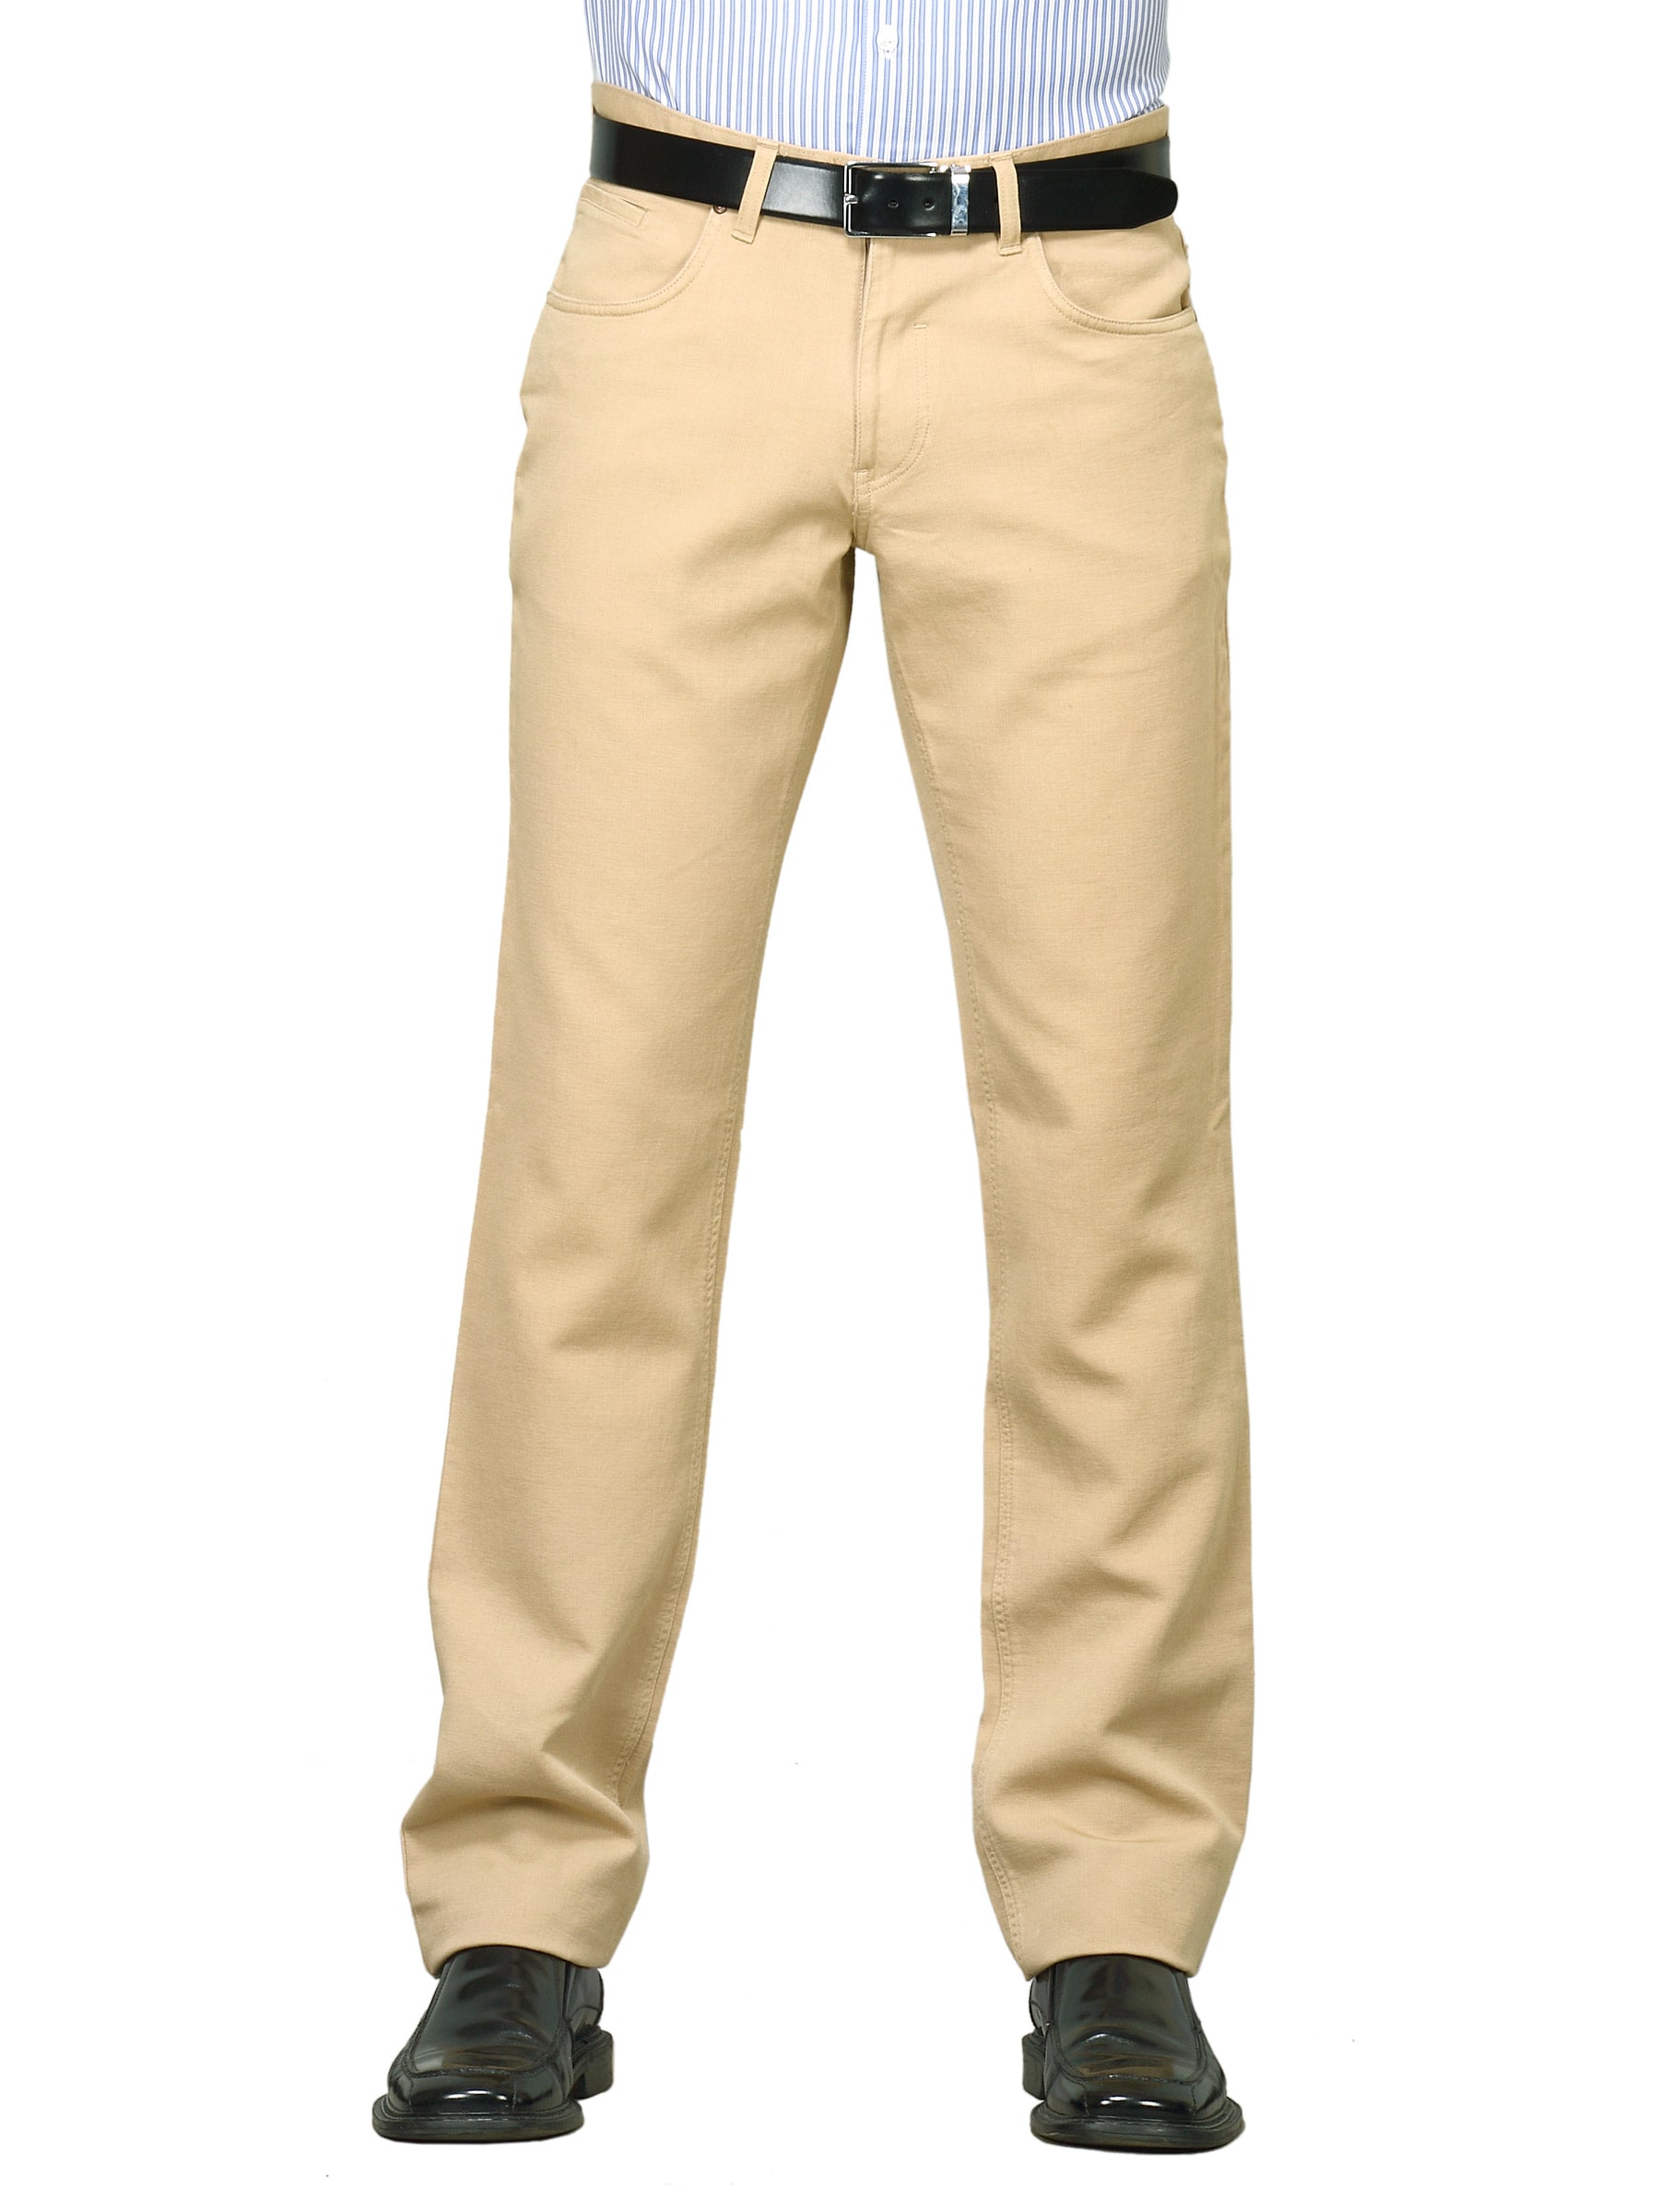 Scullers Men Rugged Chinos Beige Trousers